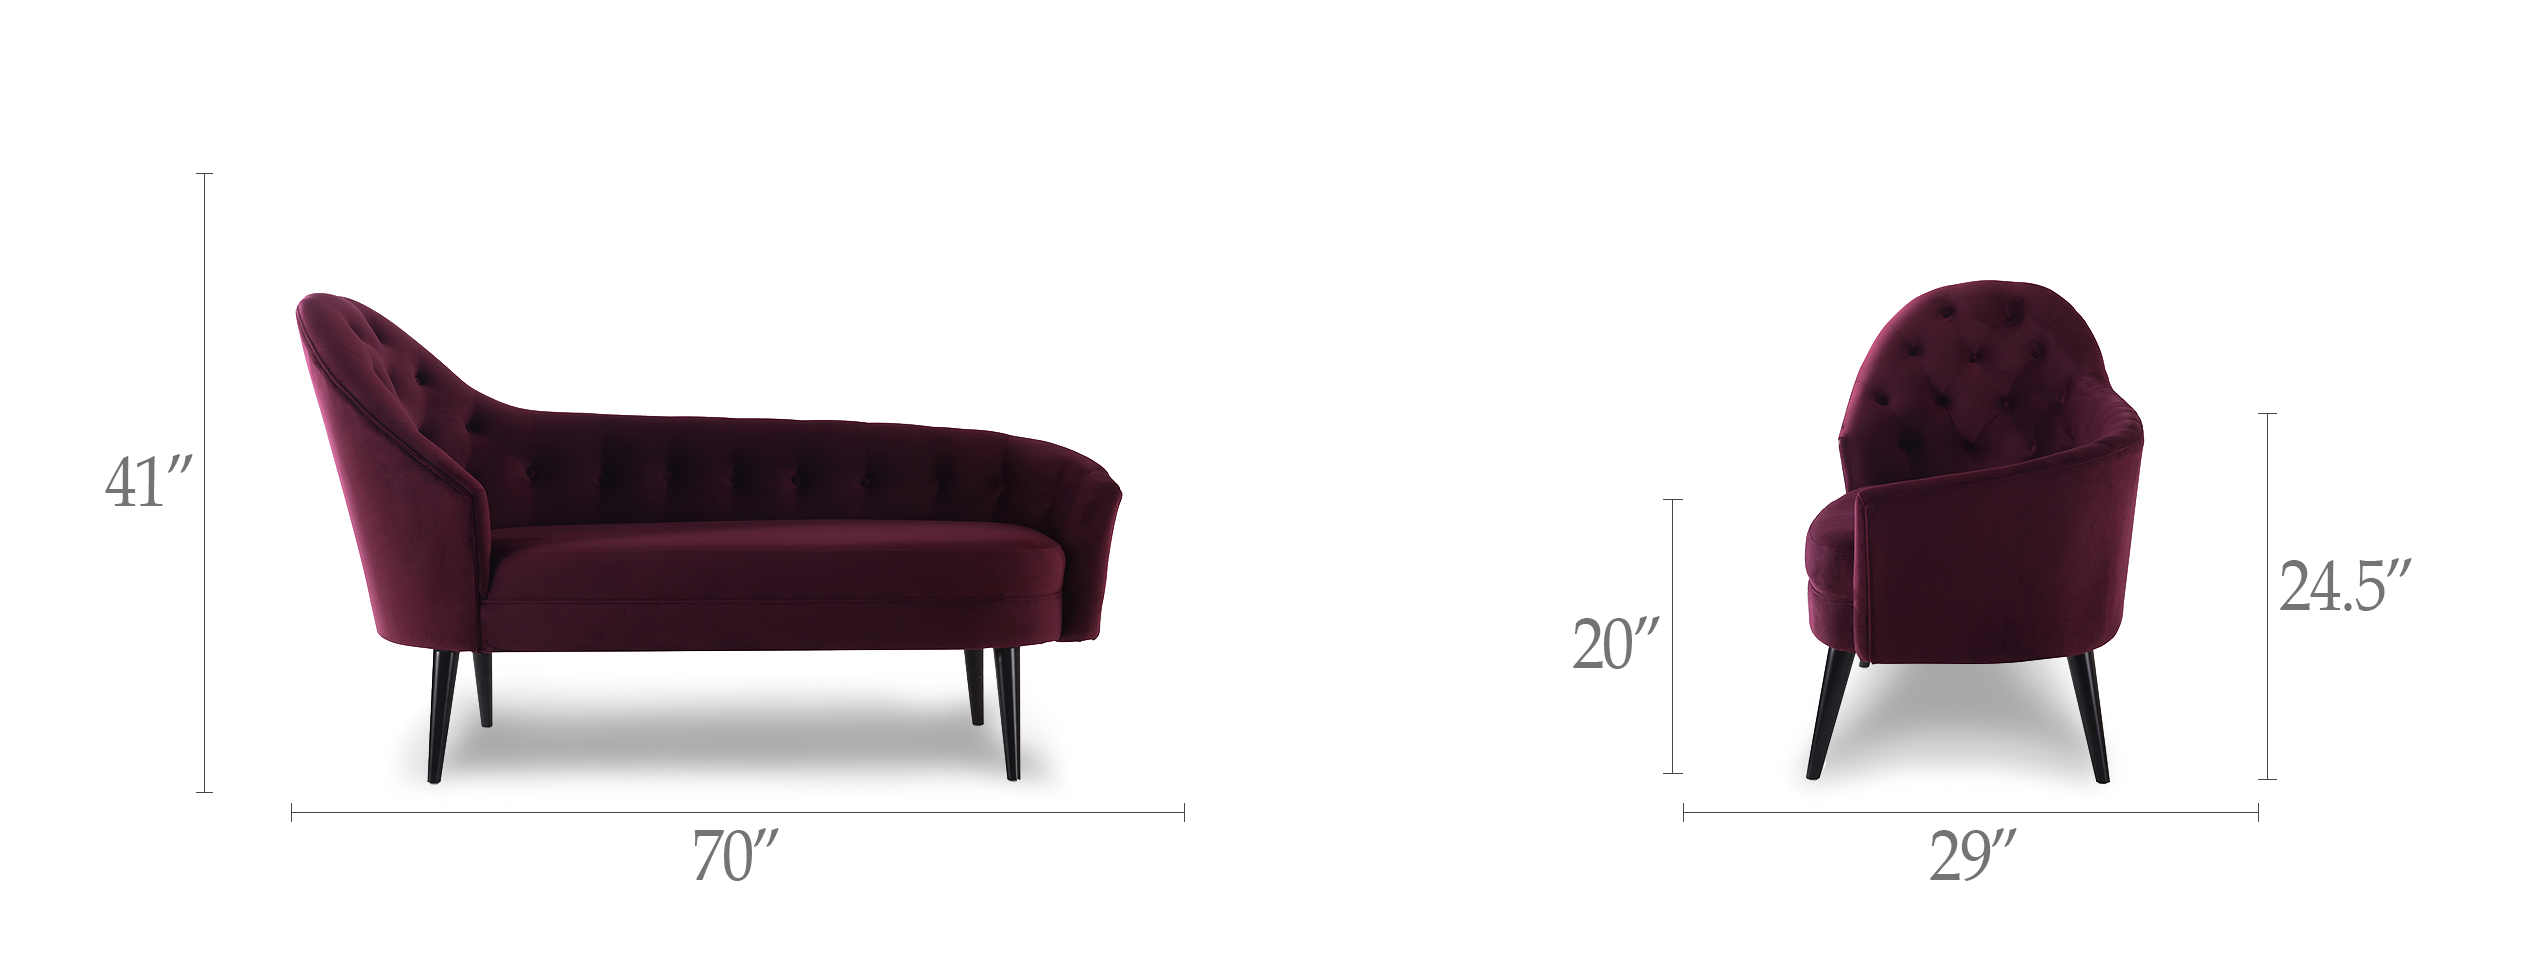 Kayleigh Tufted Chaise Lounge